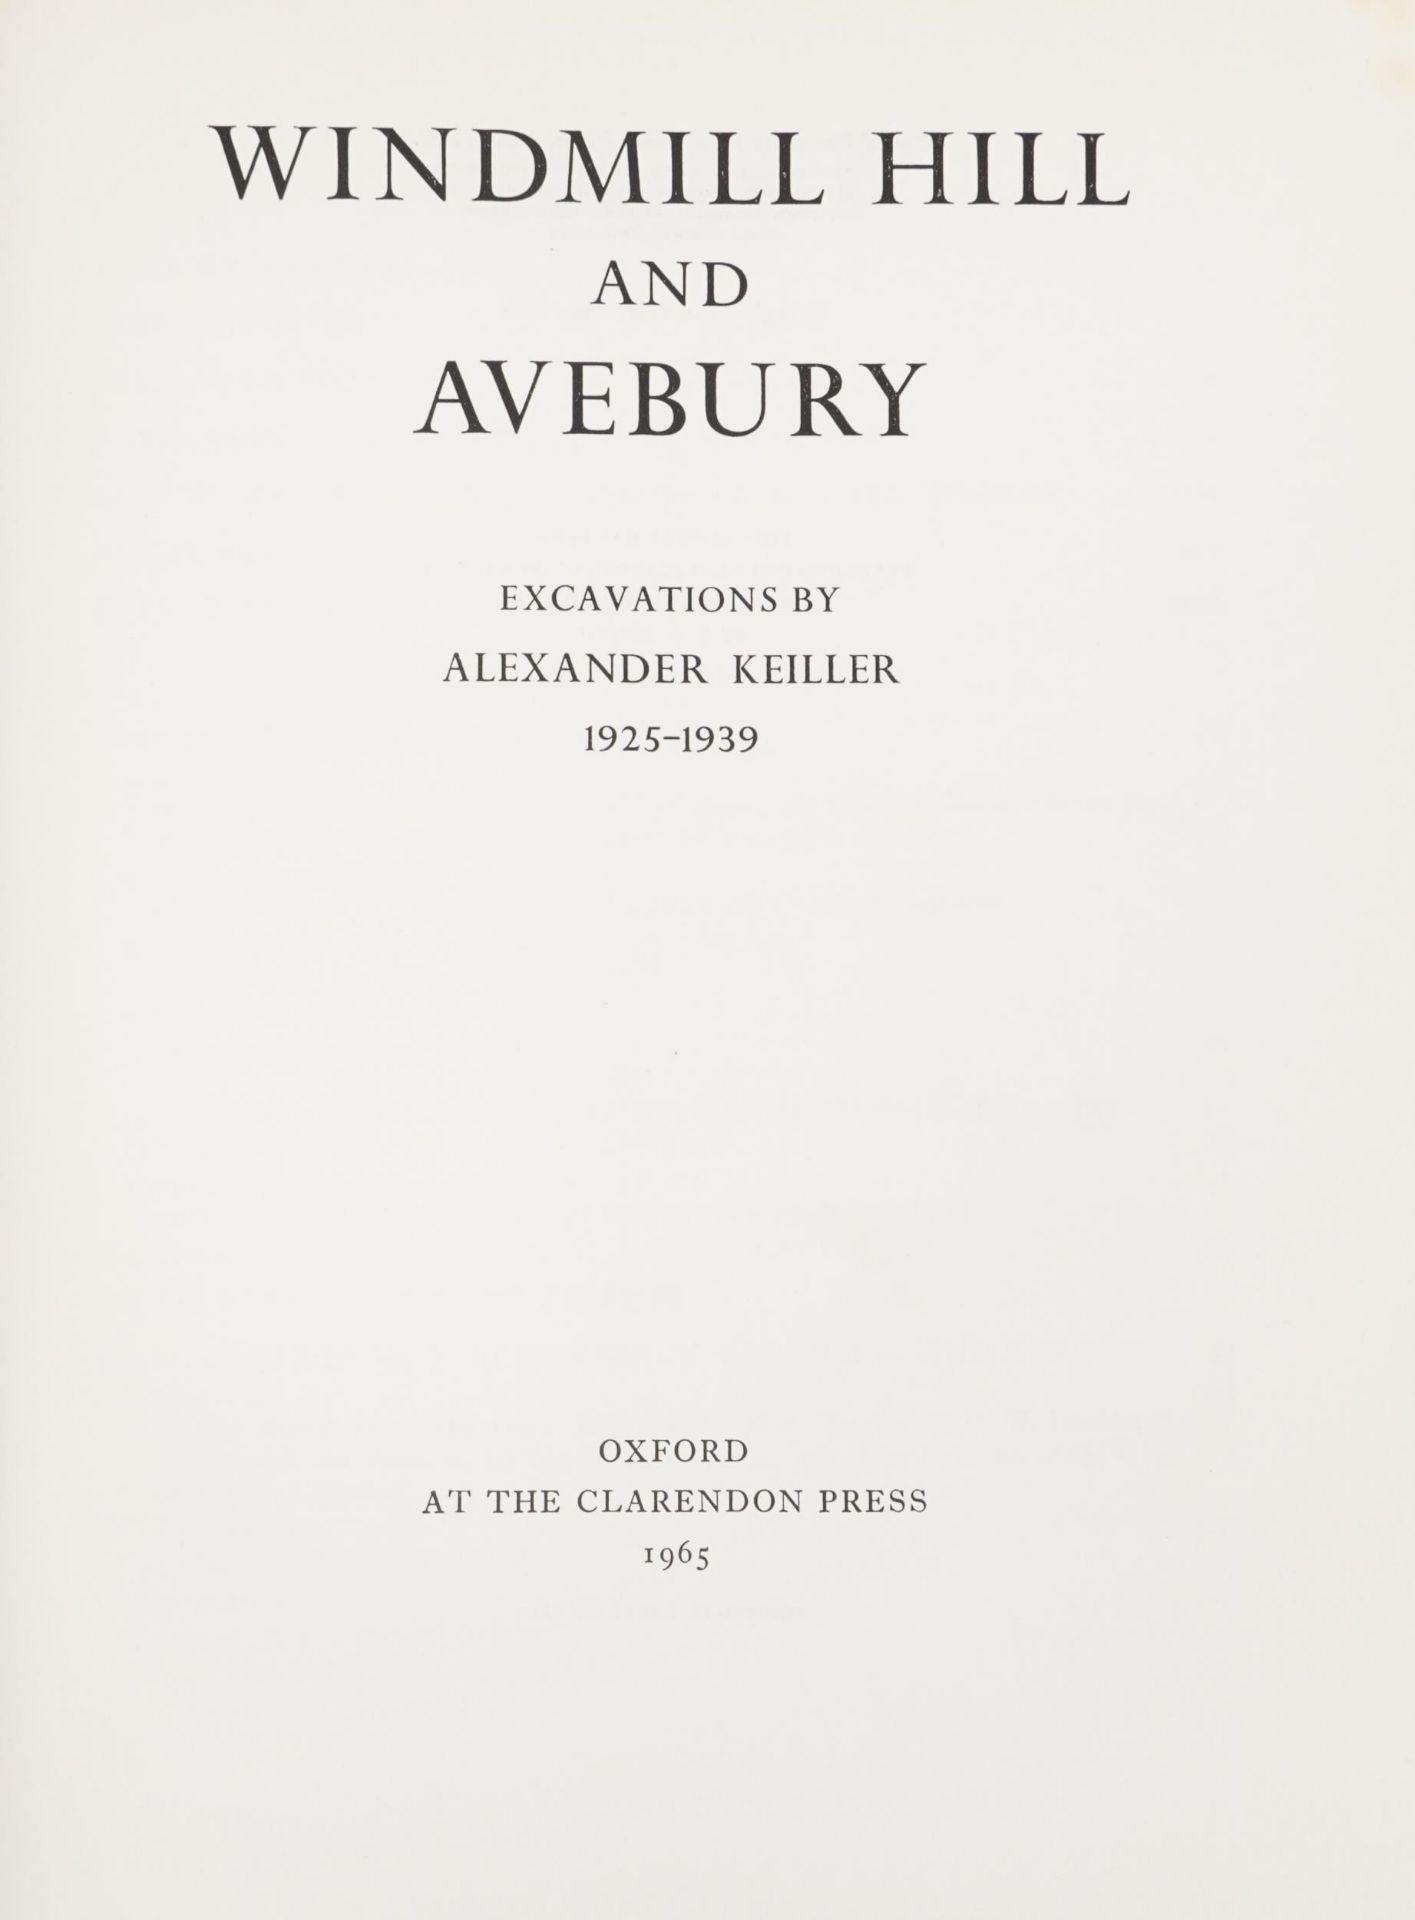 Windmill Hill and Avebury Evacuations, hardback book with dust cover by Alexander Keiller - Image 2 of 3